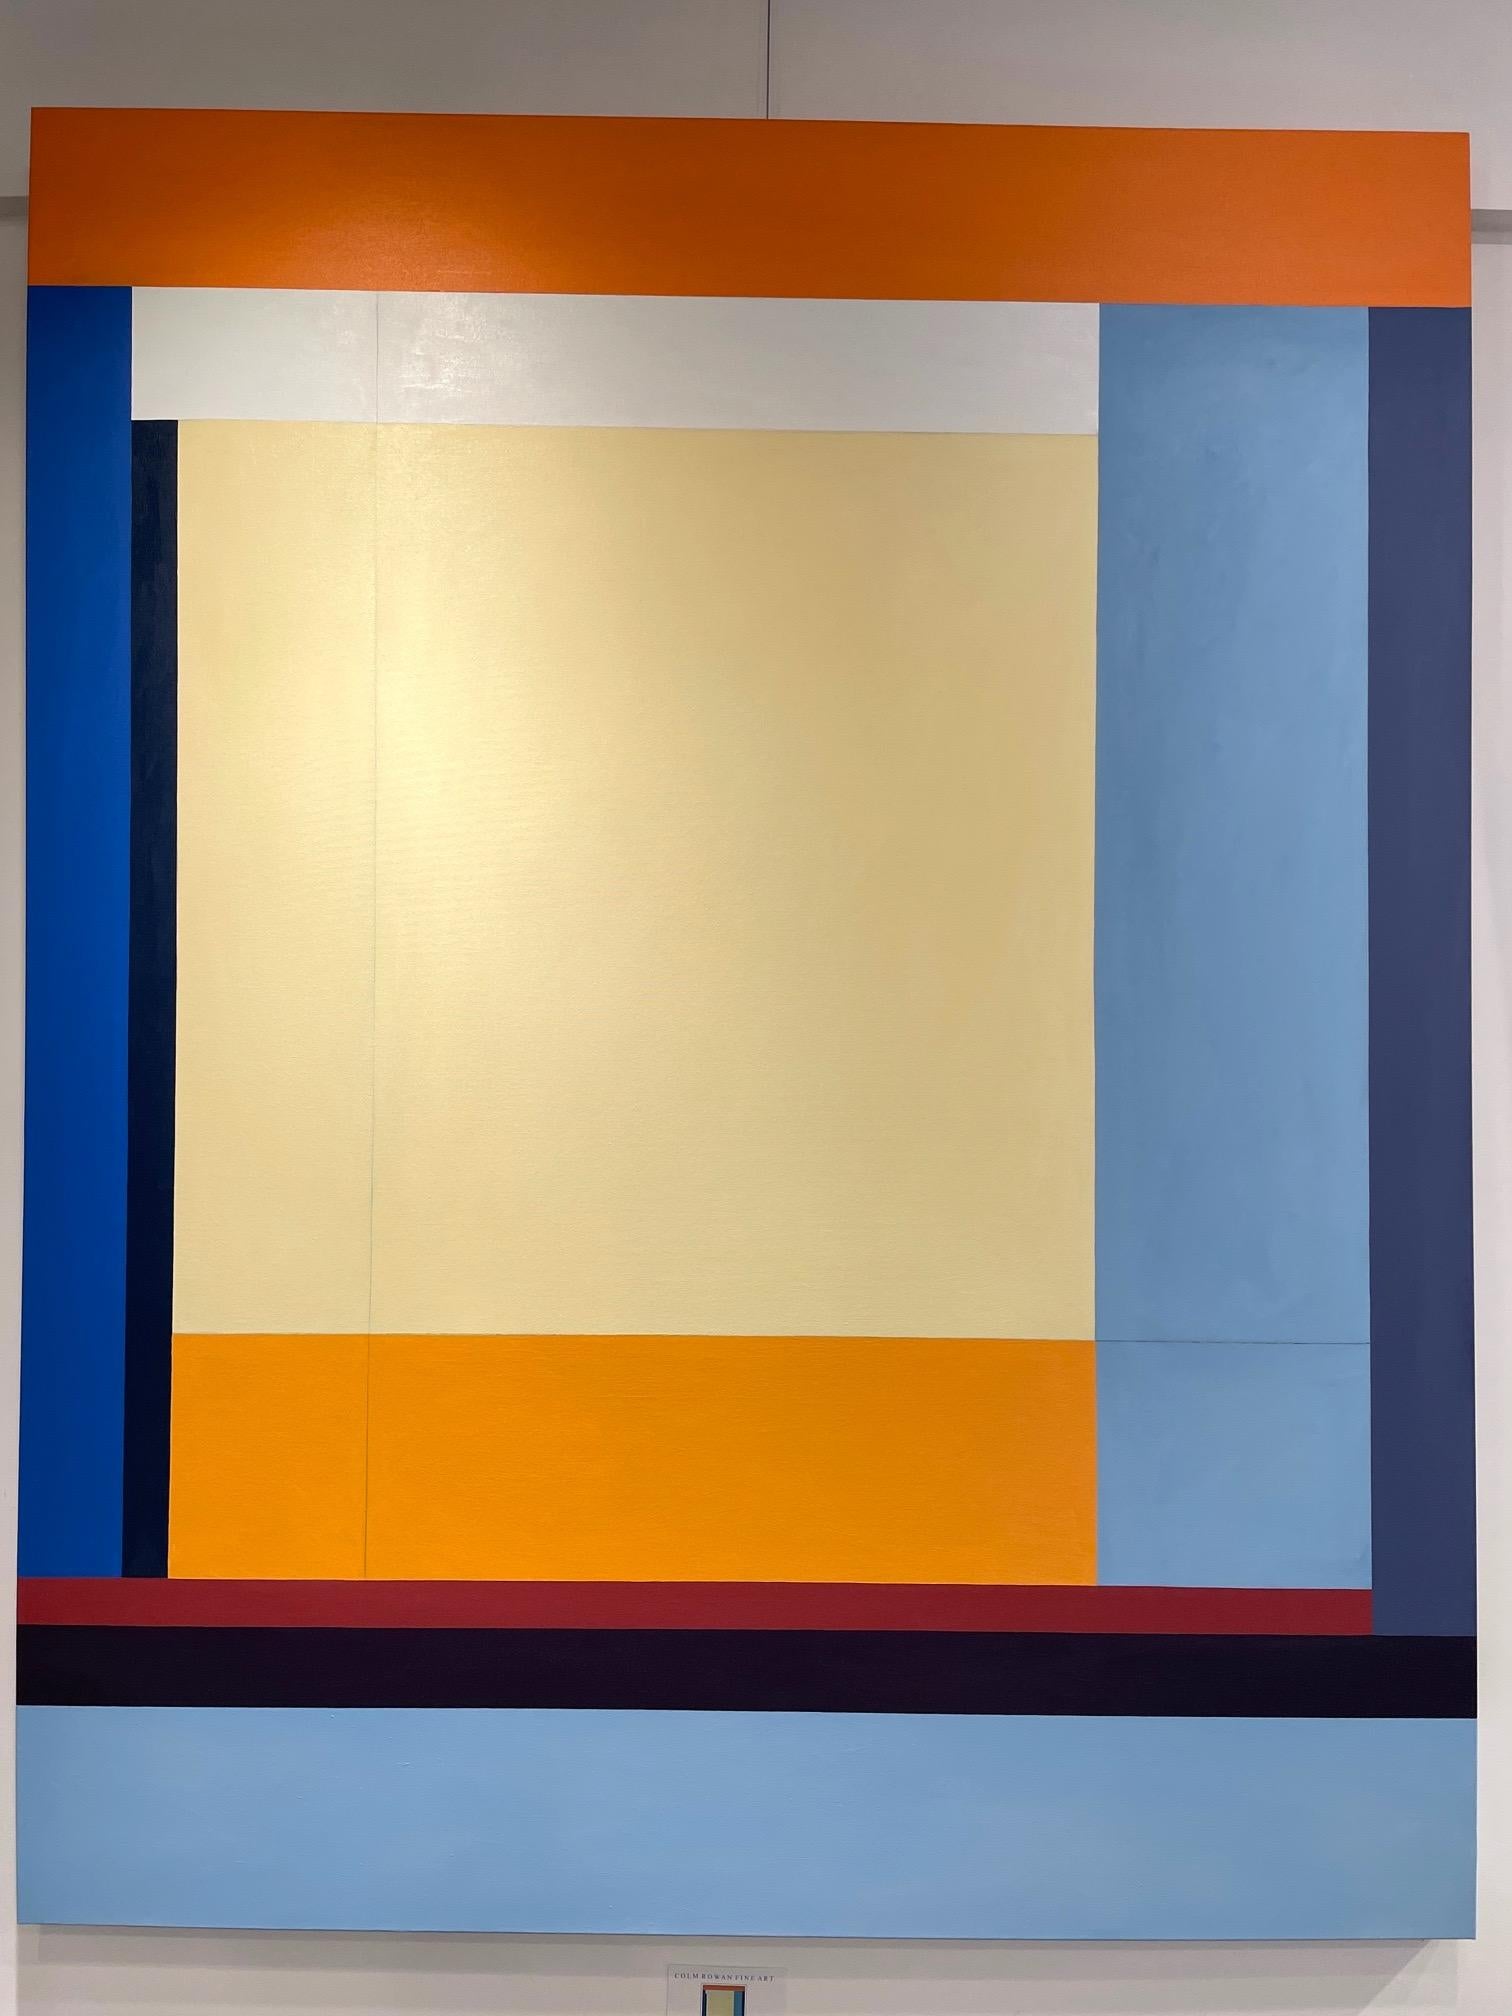 Chris Kelly's art is created in the Hard-Edge style of painting, a style made popular by Ellsworth Kelly, Frank Stella, and Kenneth Noland to name a few. As a painter and a sculptor, Chris Kelly's work is inspired by the Golden Ratio and the